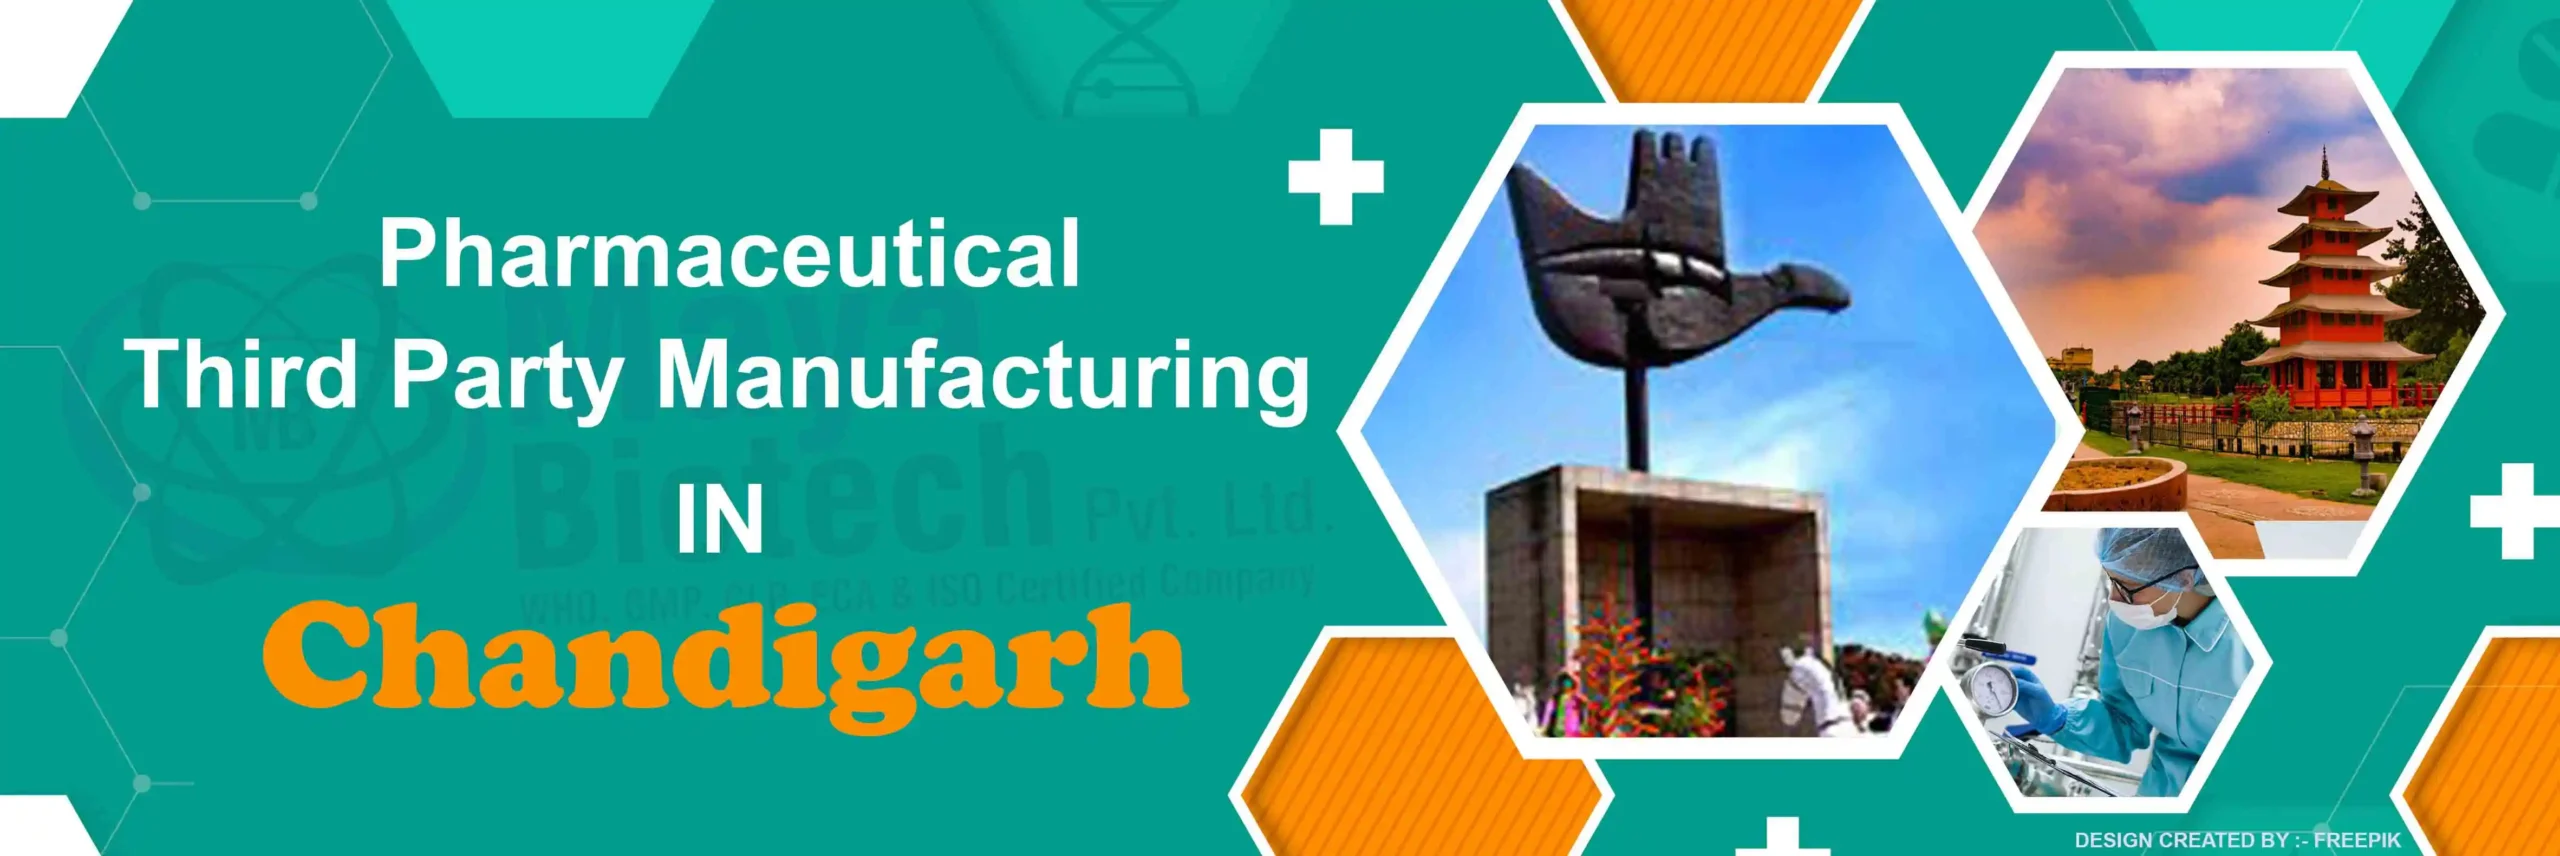 Pharmaceutical Manufacturers in India